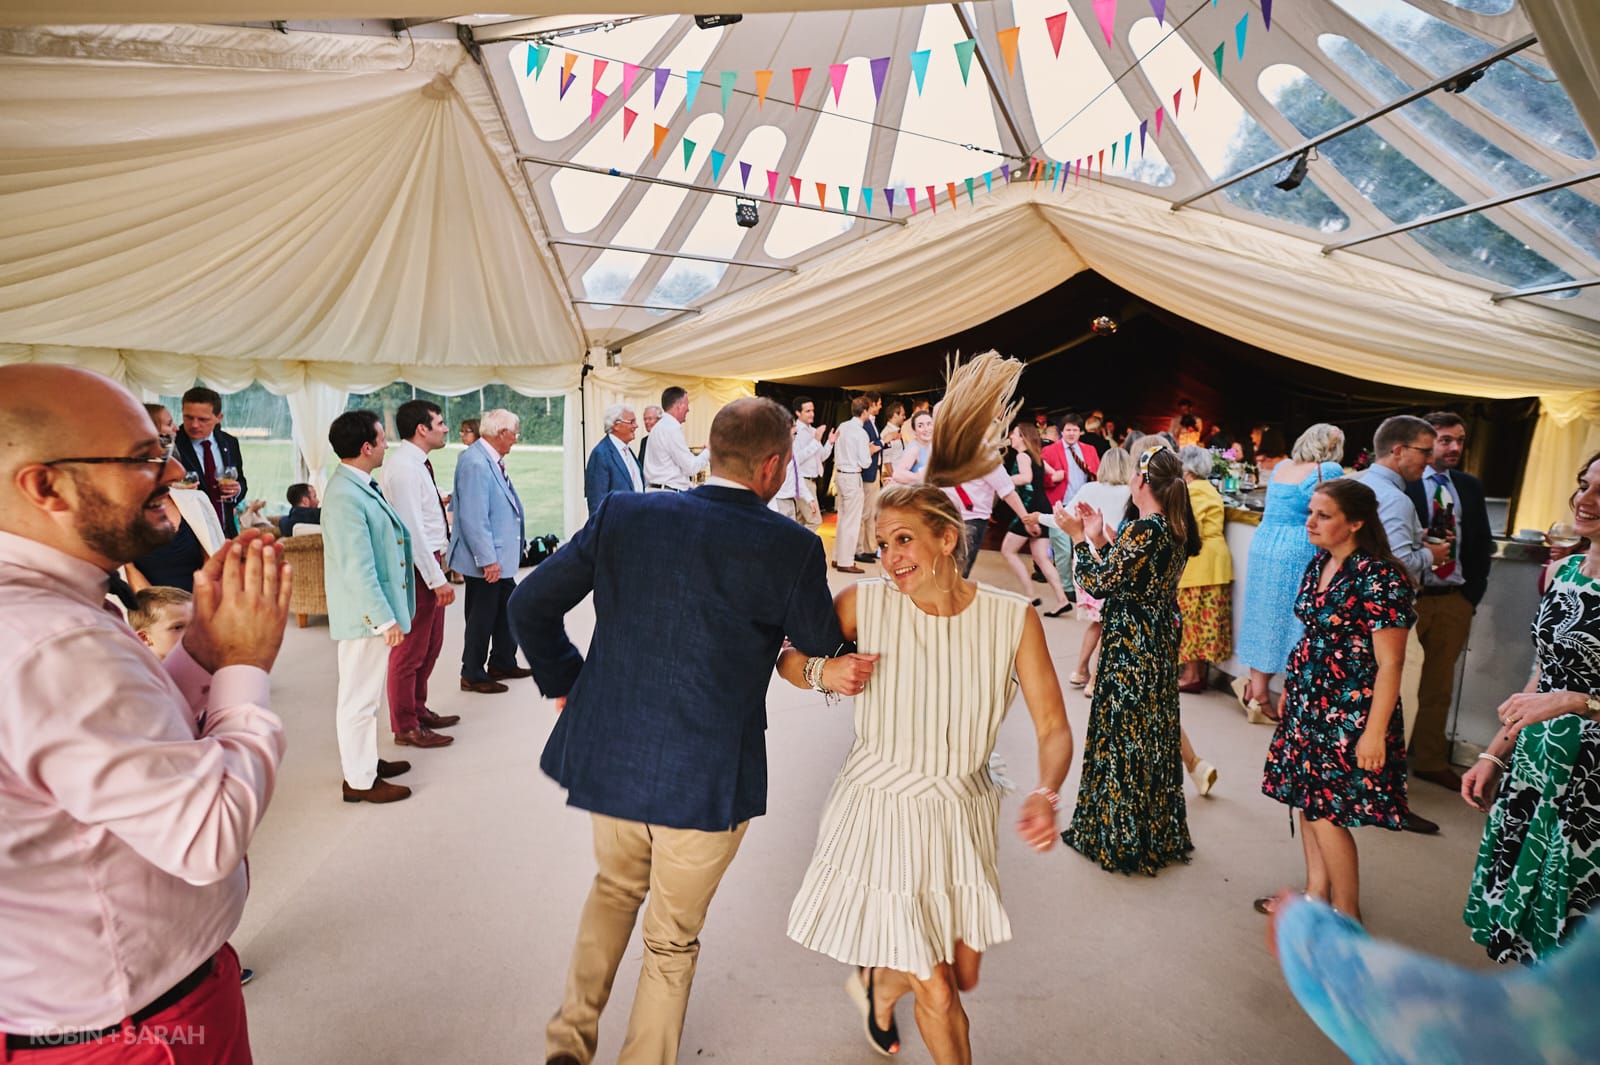 Wedding guests dance to ceilidh at wedding reception